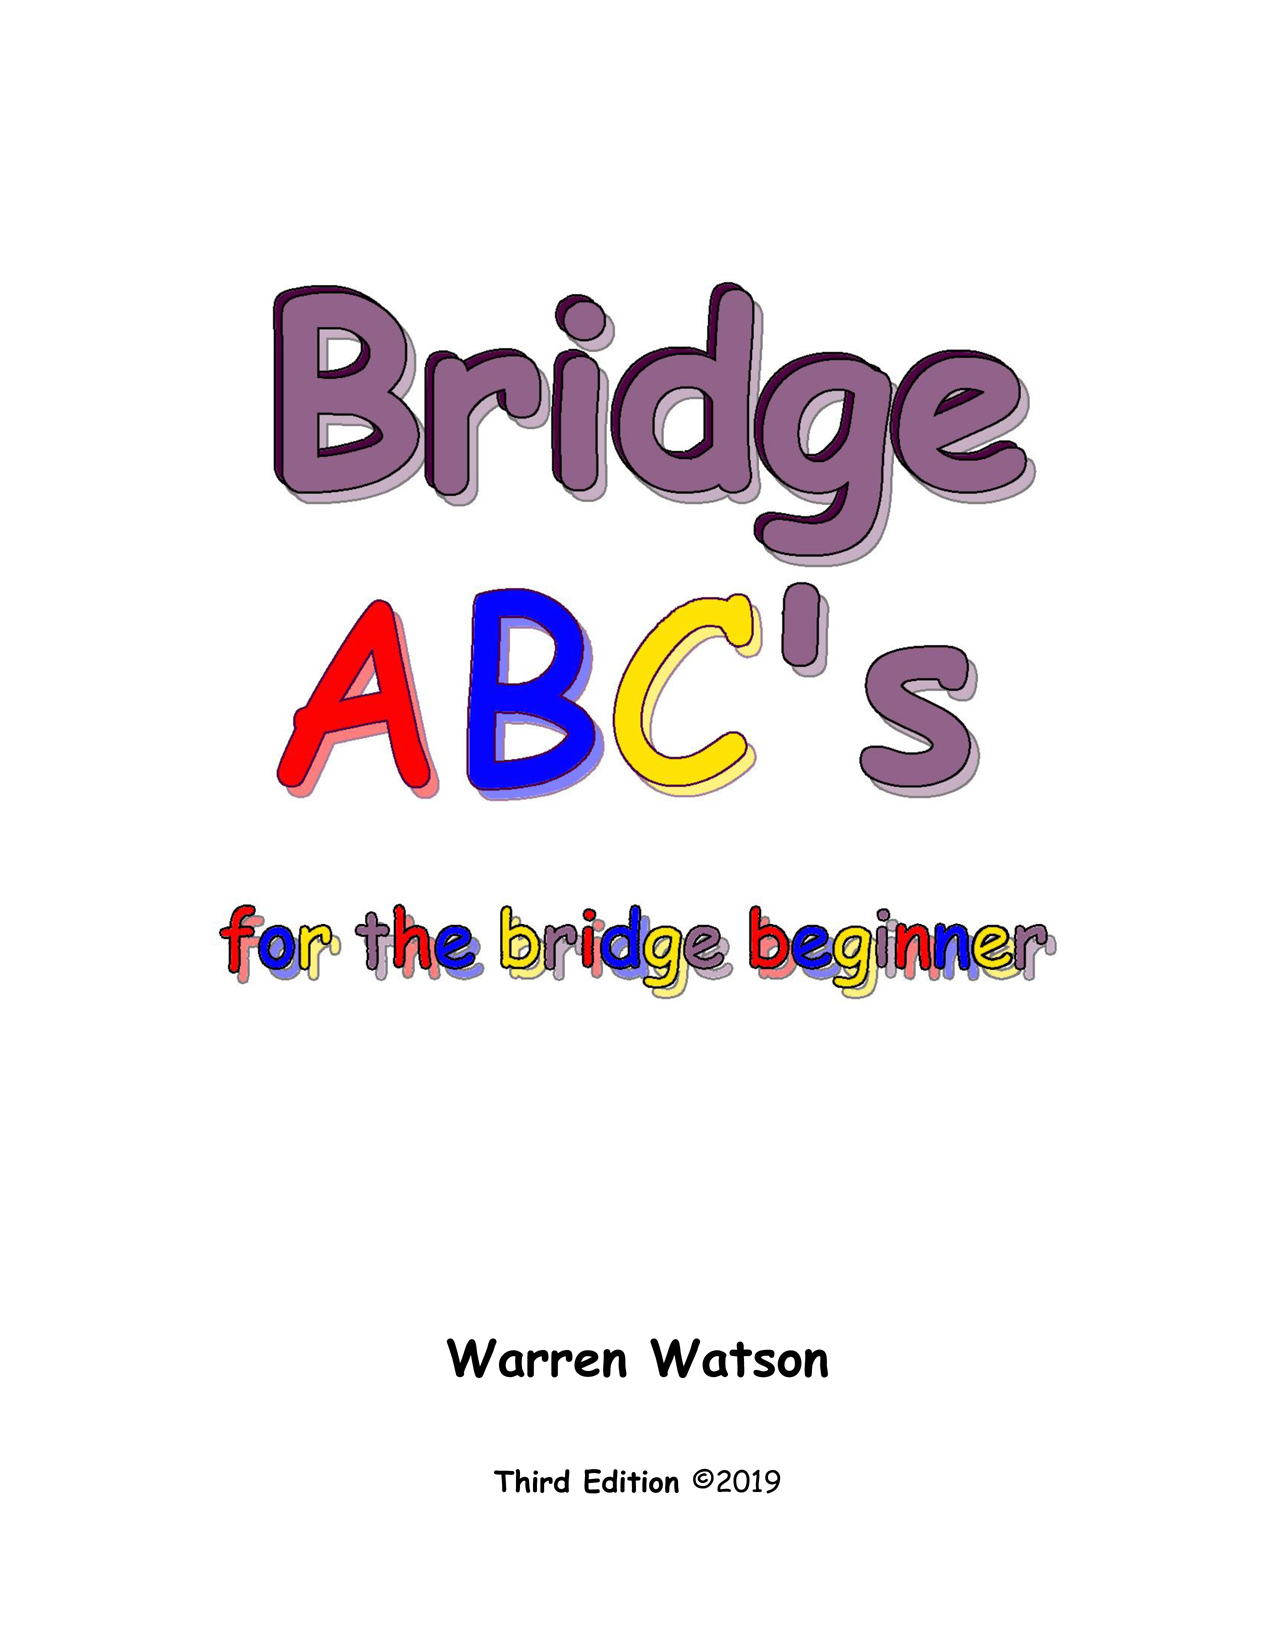 The first book of the alphabet trilogy